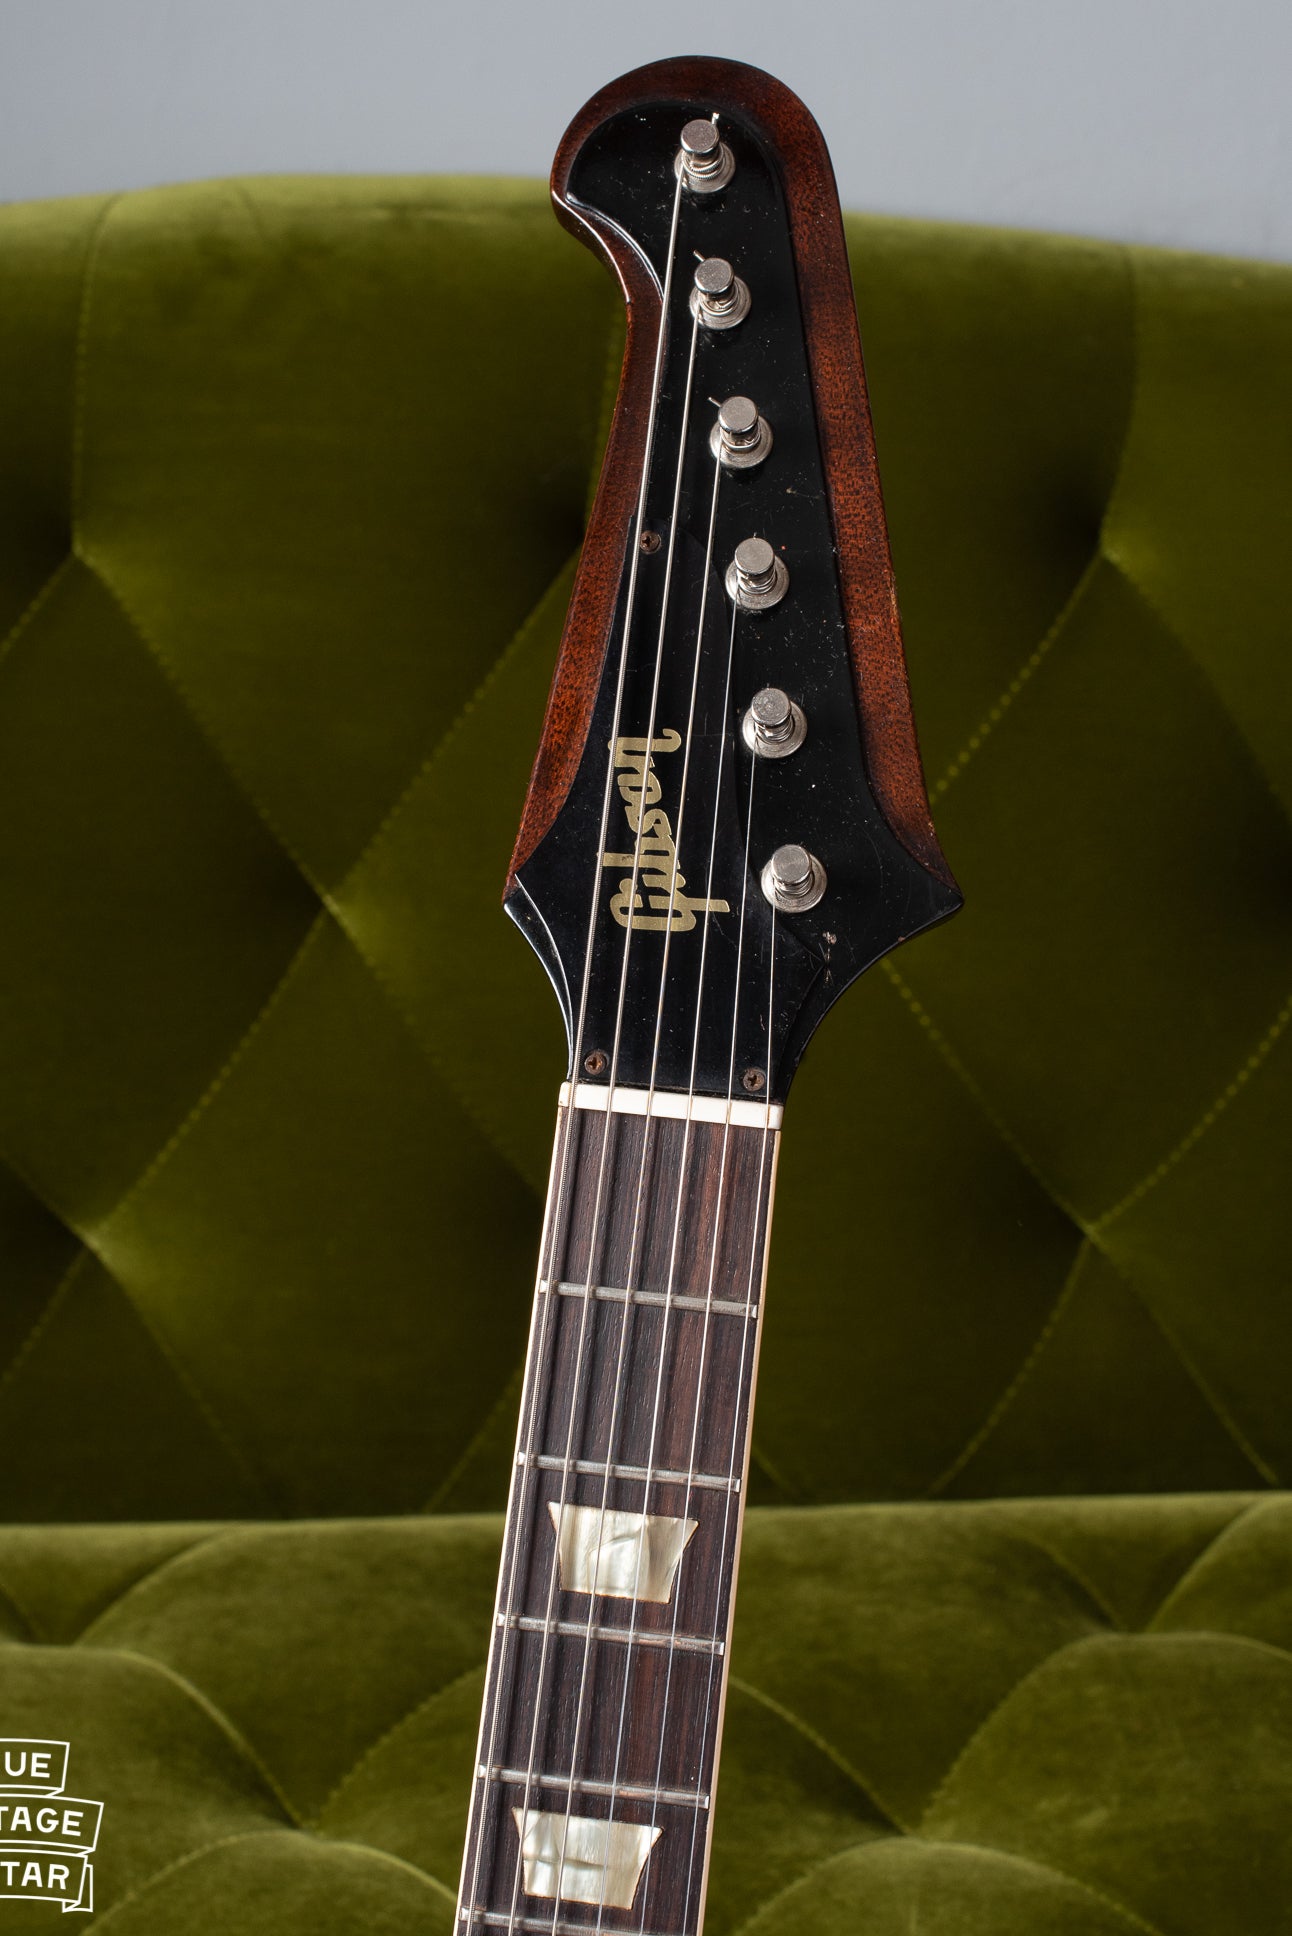 Reverse style headstock and neck on Gibson Firebird 1964